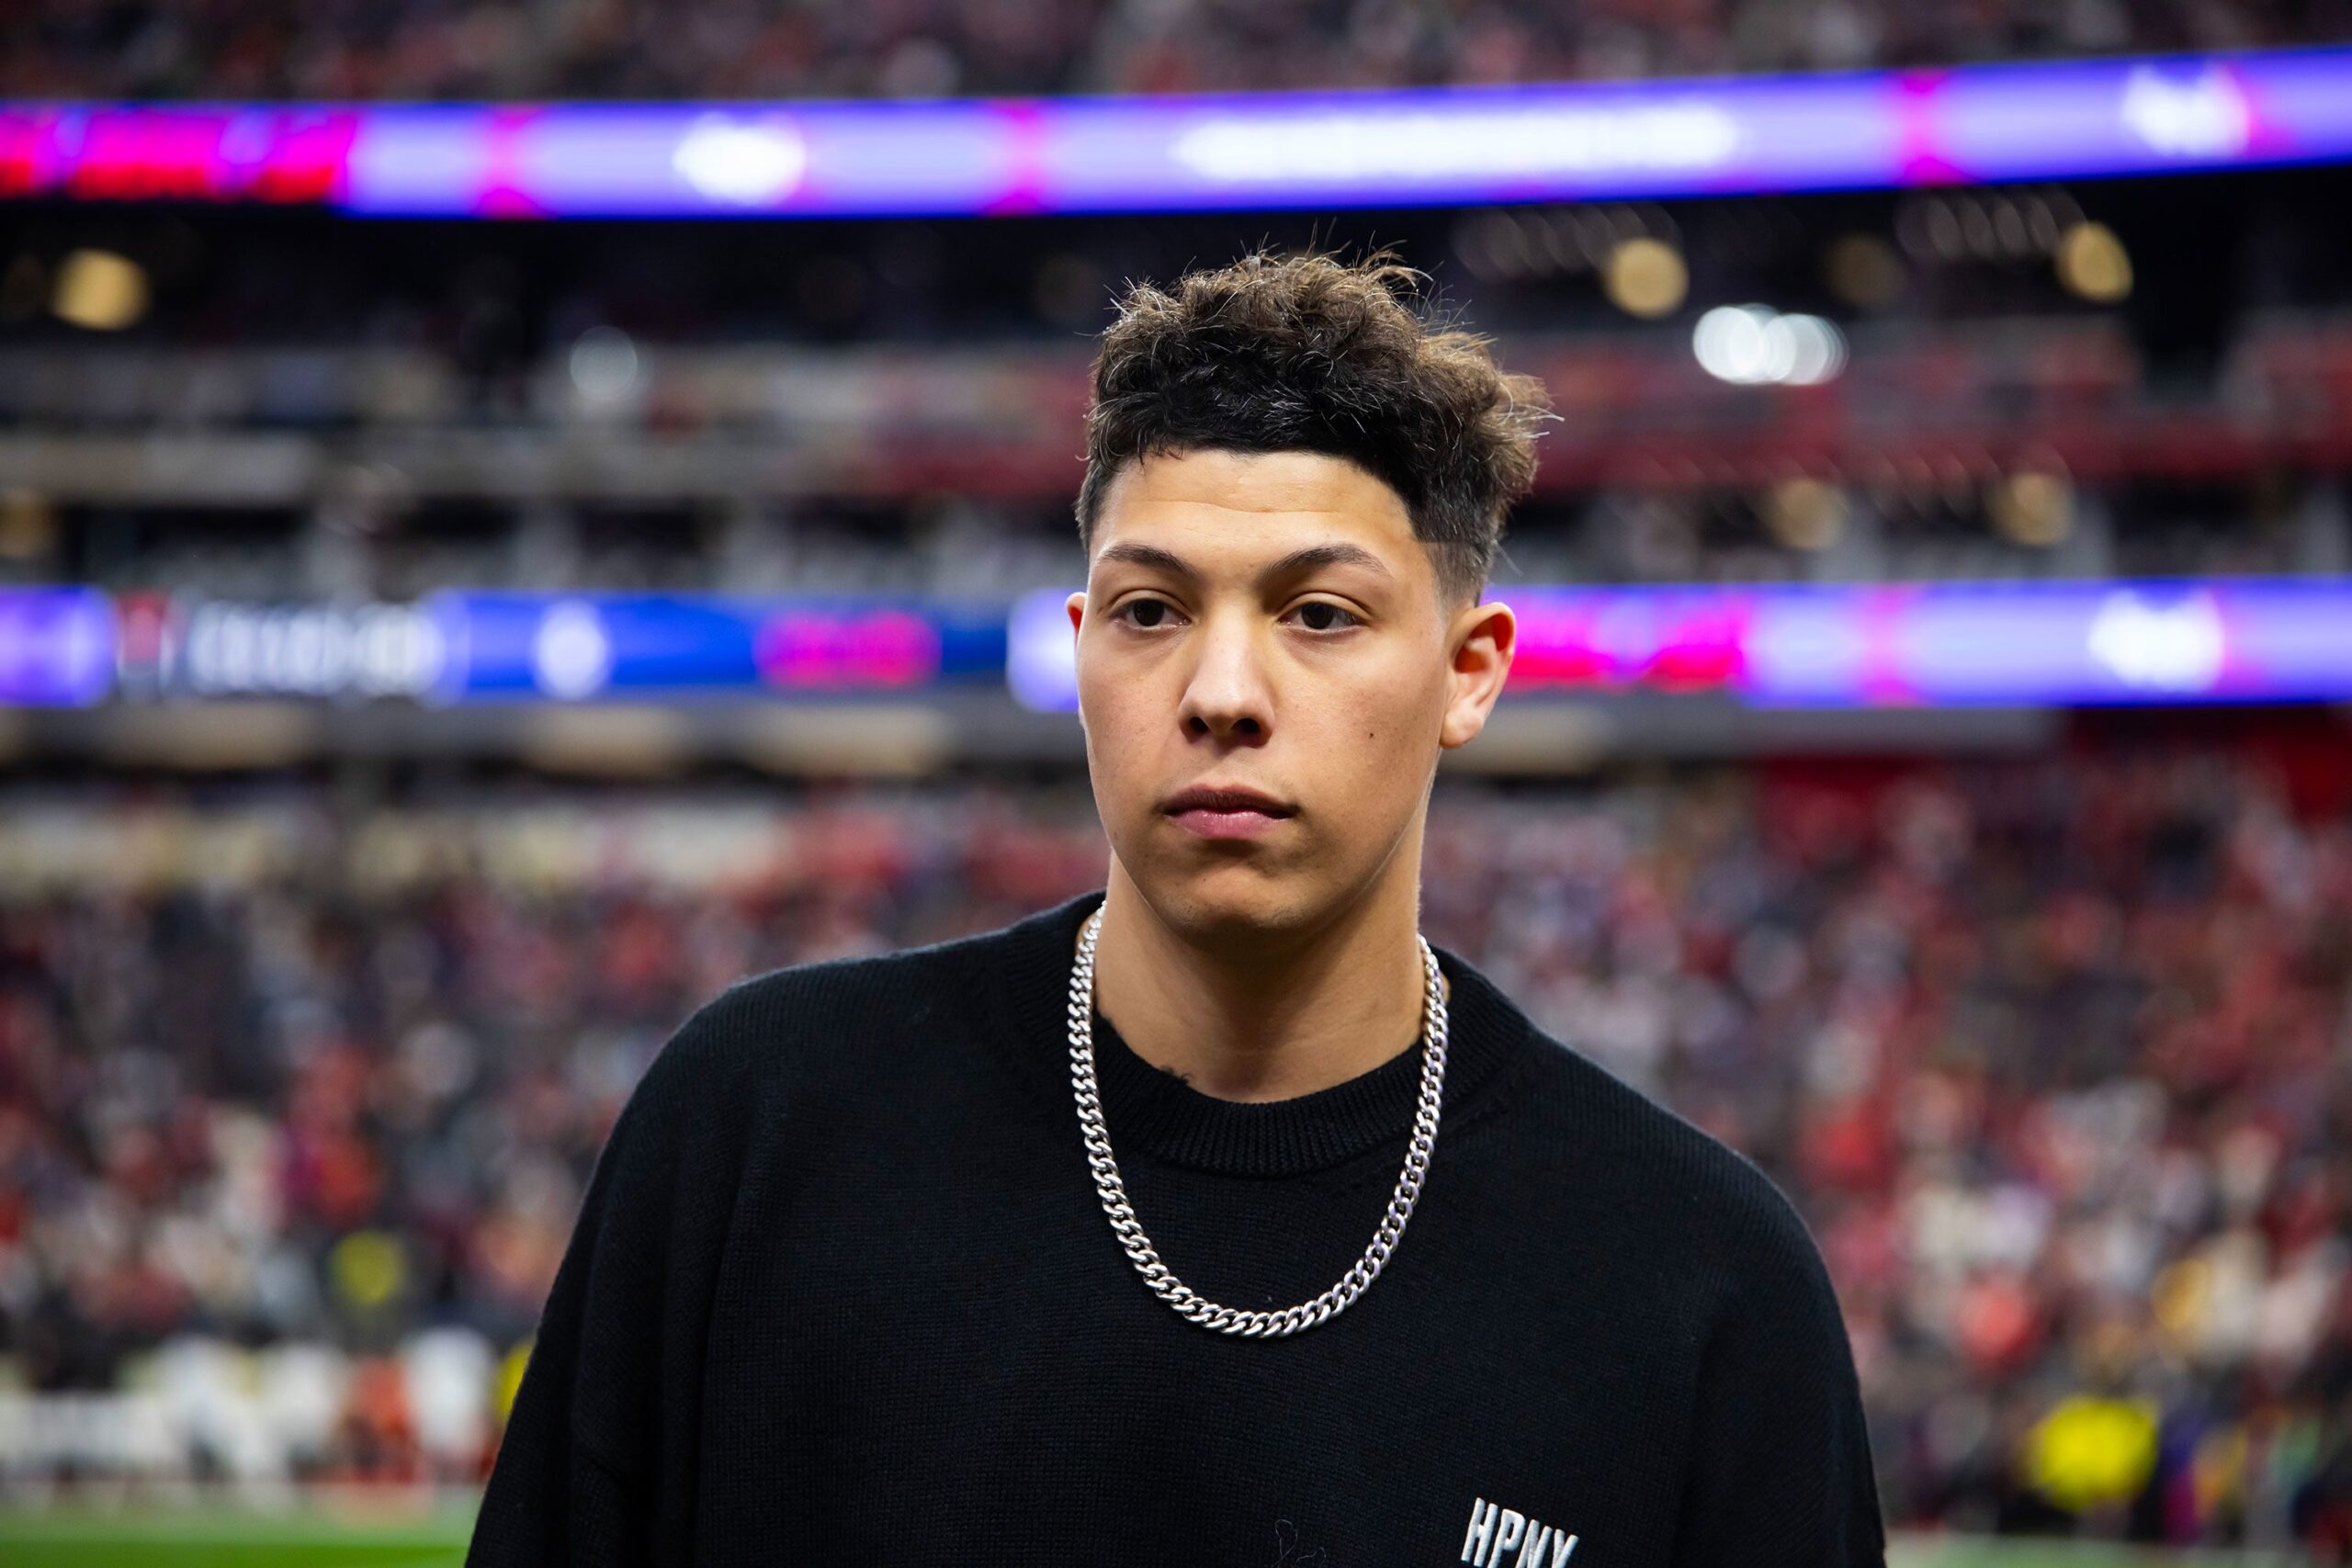 Younger brother of Chiefs quarterback Patrick Mahomes sentenced to 6 months unsupervised probation in battery case - Crime and Courts - News